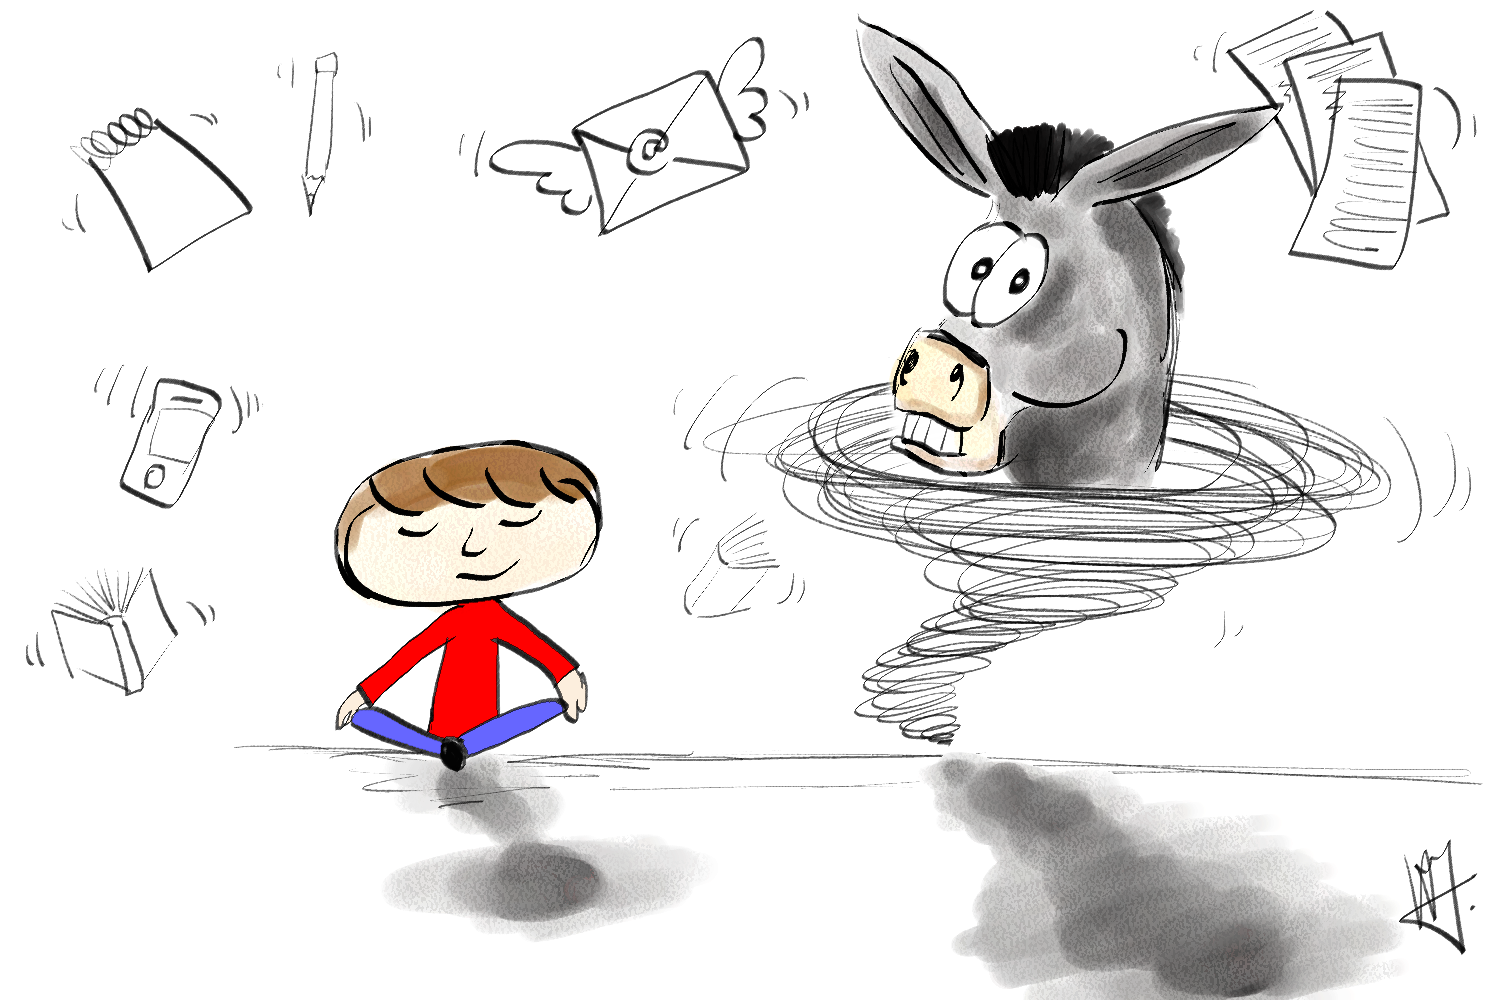 Cartoon person sitting amongst a whirlwind of things including Derek the Donkey in an actual whirlwind